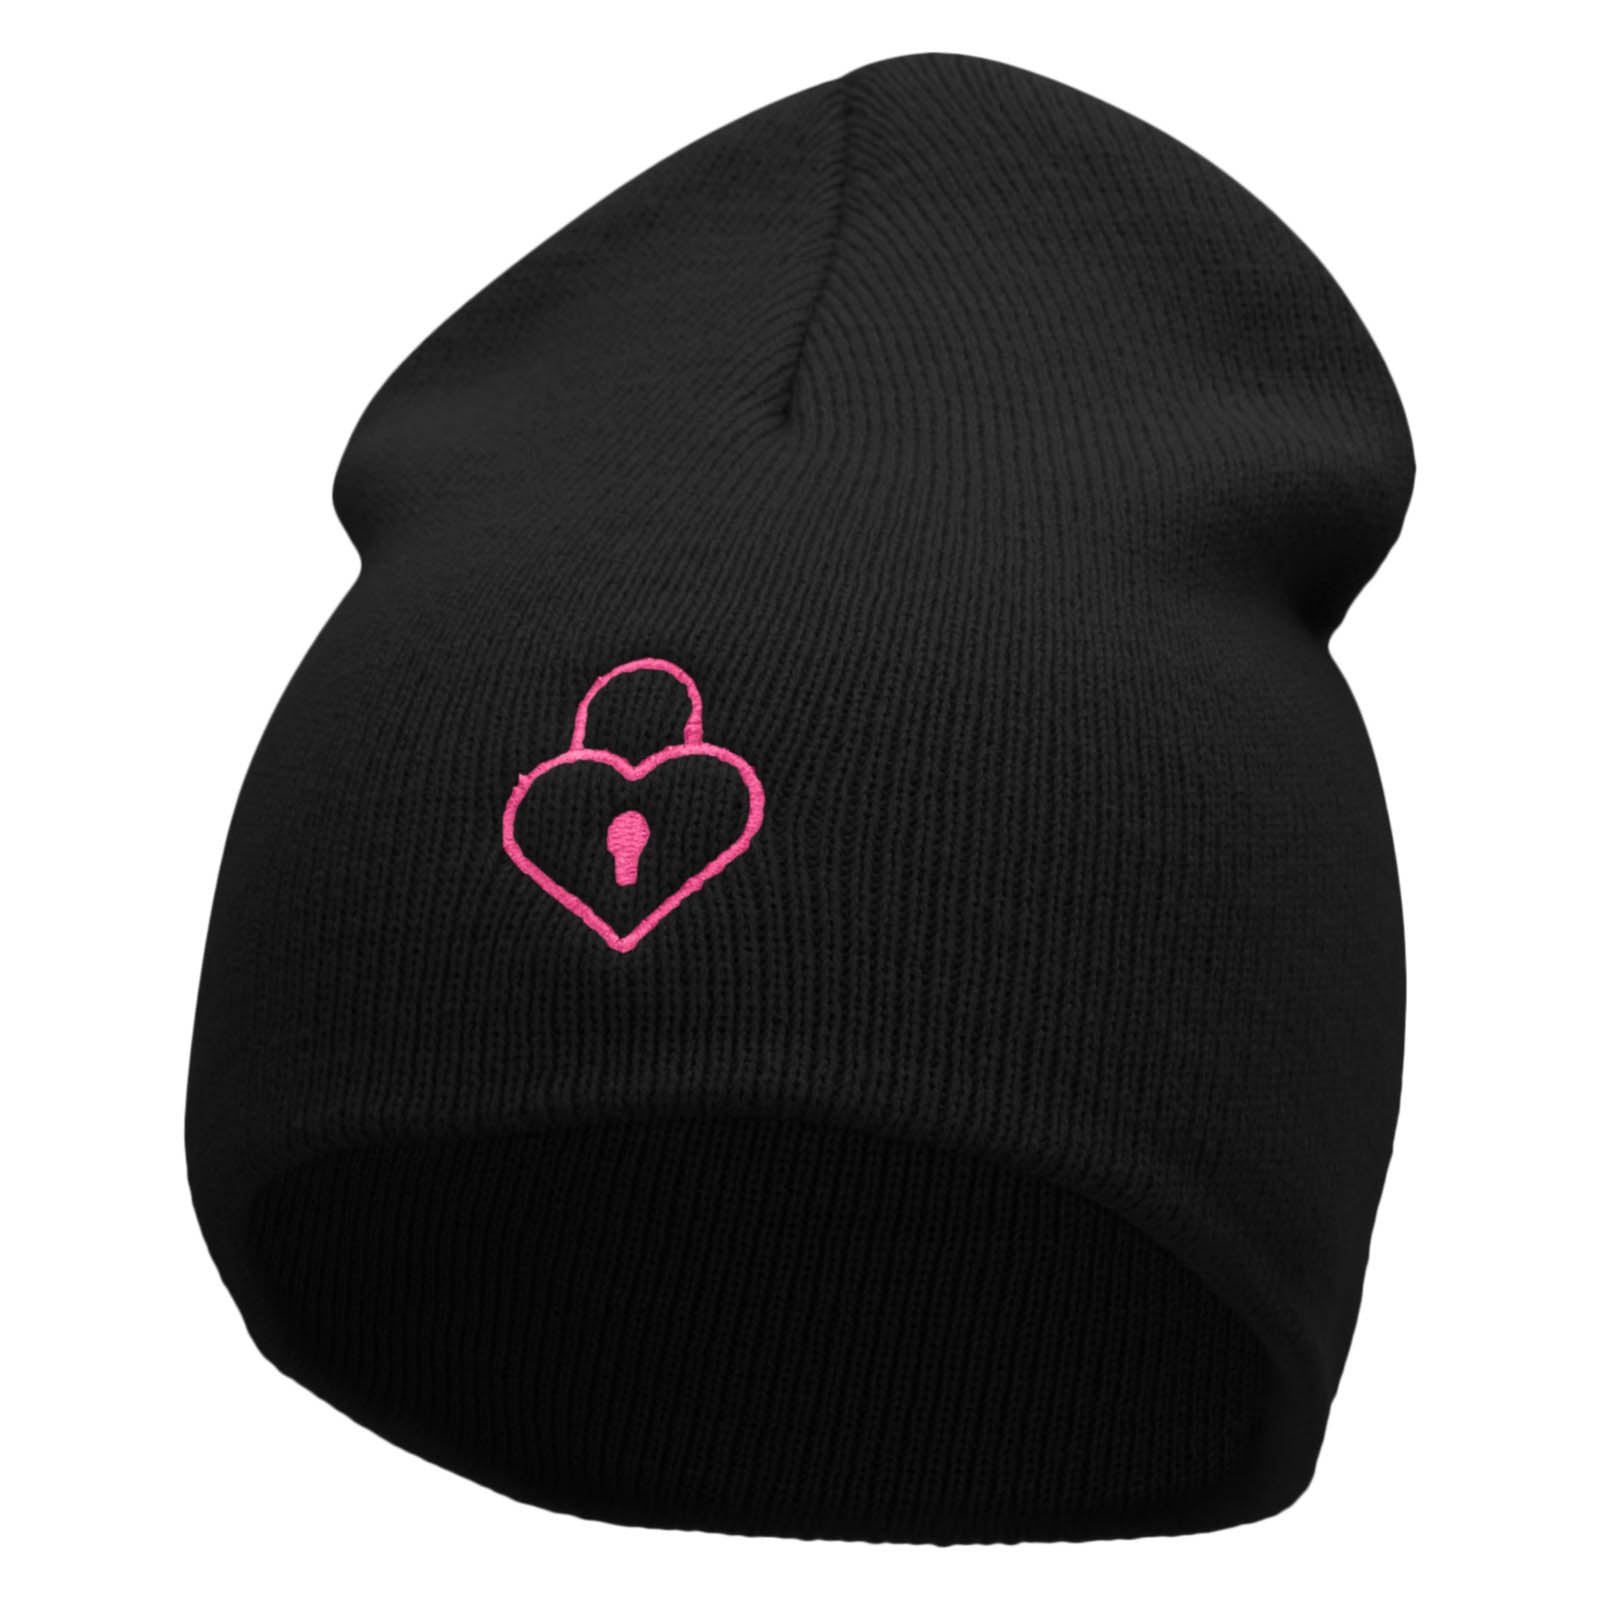 Lock Of Love Embroidered 8 Inch Short Beanie Made in USA - Black OSFM